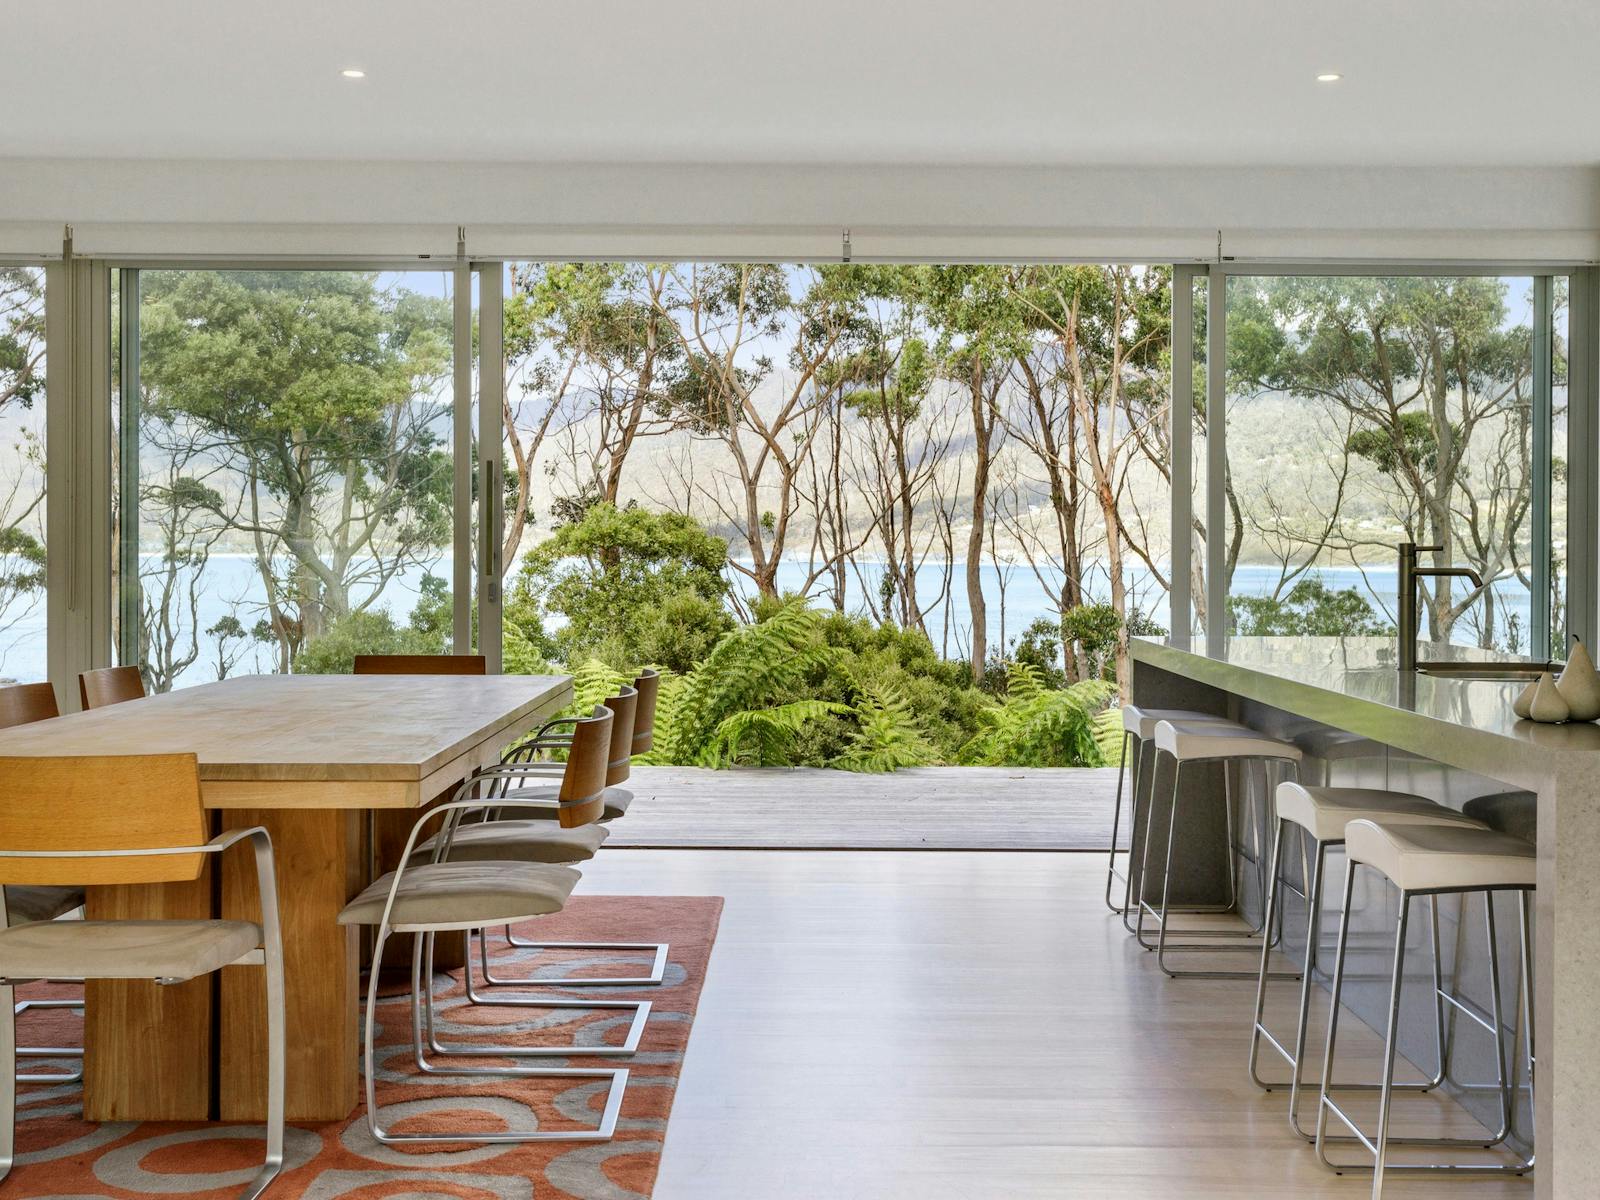 The dining area flows out onto the front deck with views over the bay.